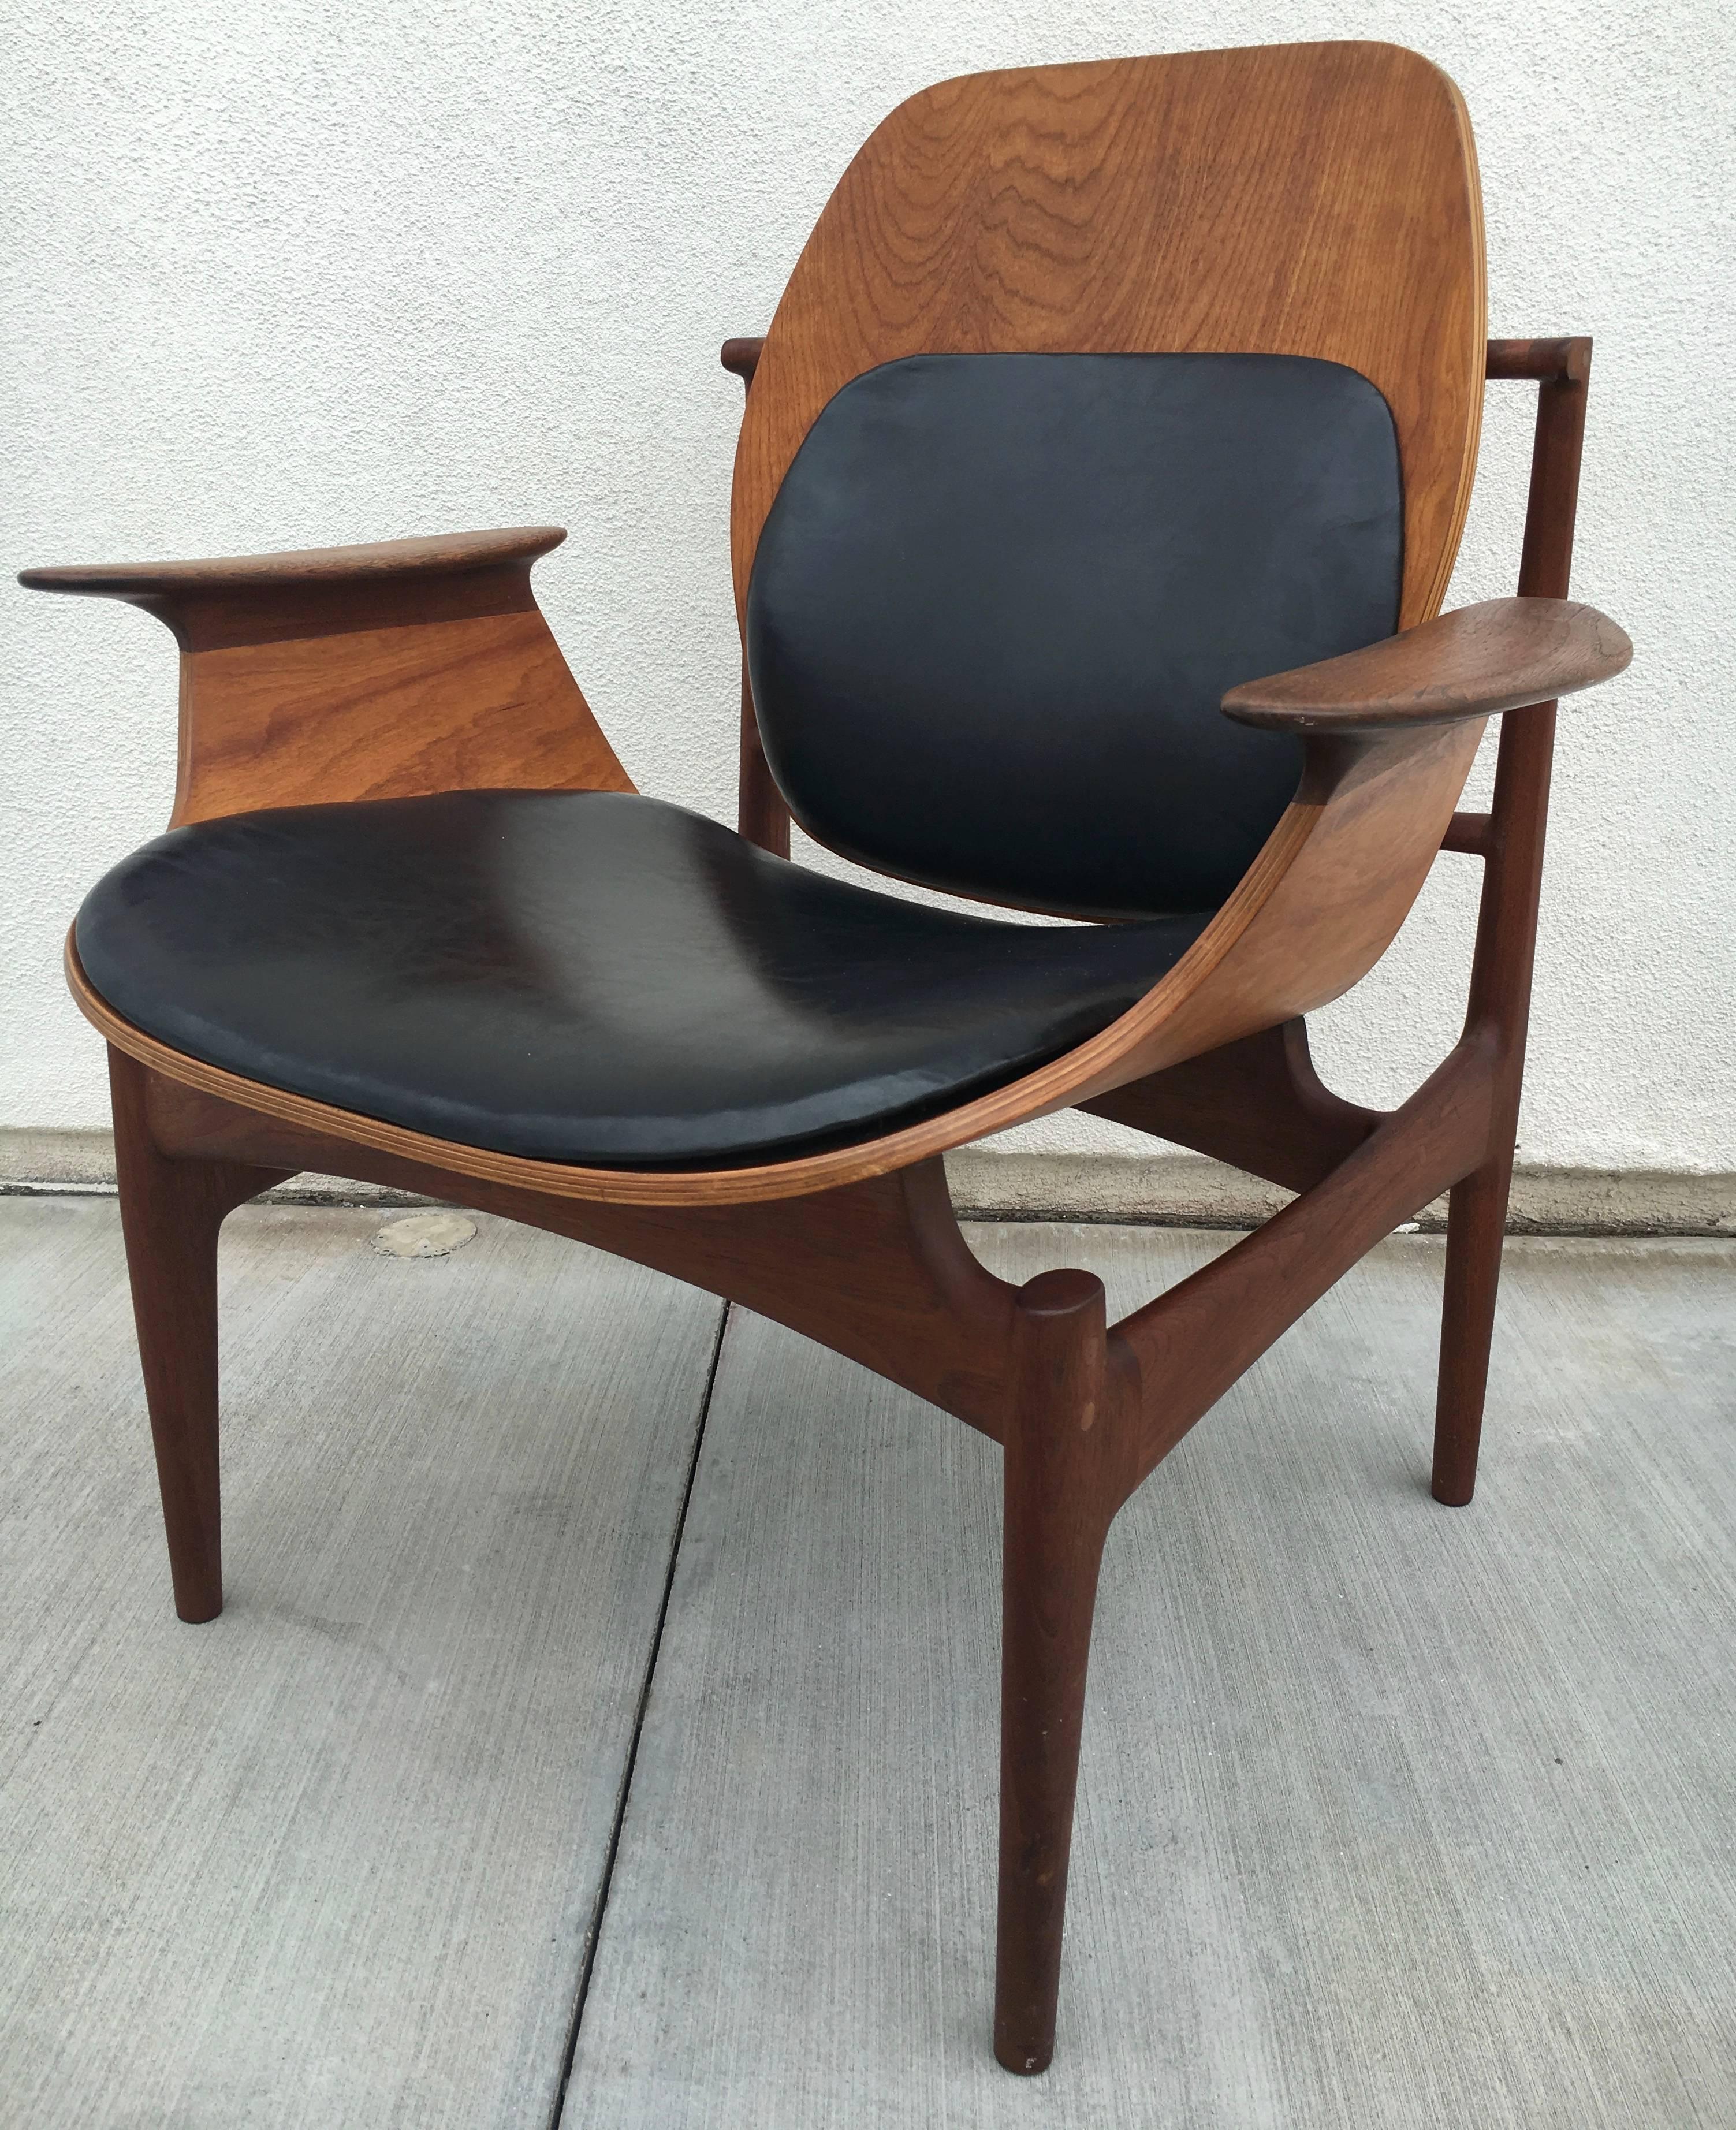 Mid-20th Century Stunning One off 1/1 Studio Chair by John McWilliams, California, circa 1960s For Sale